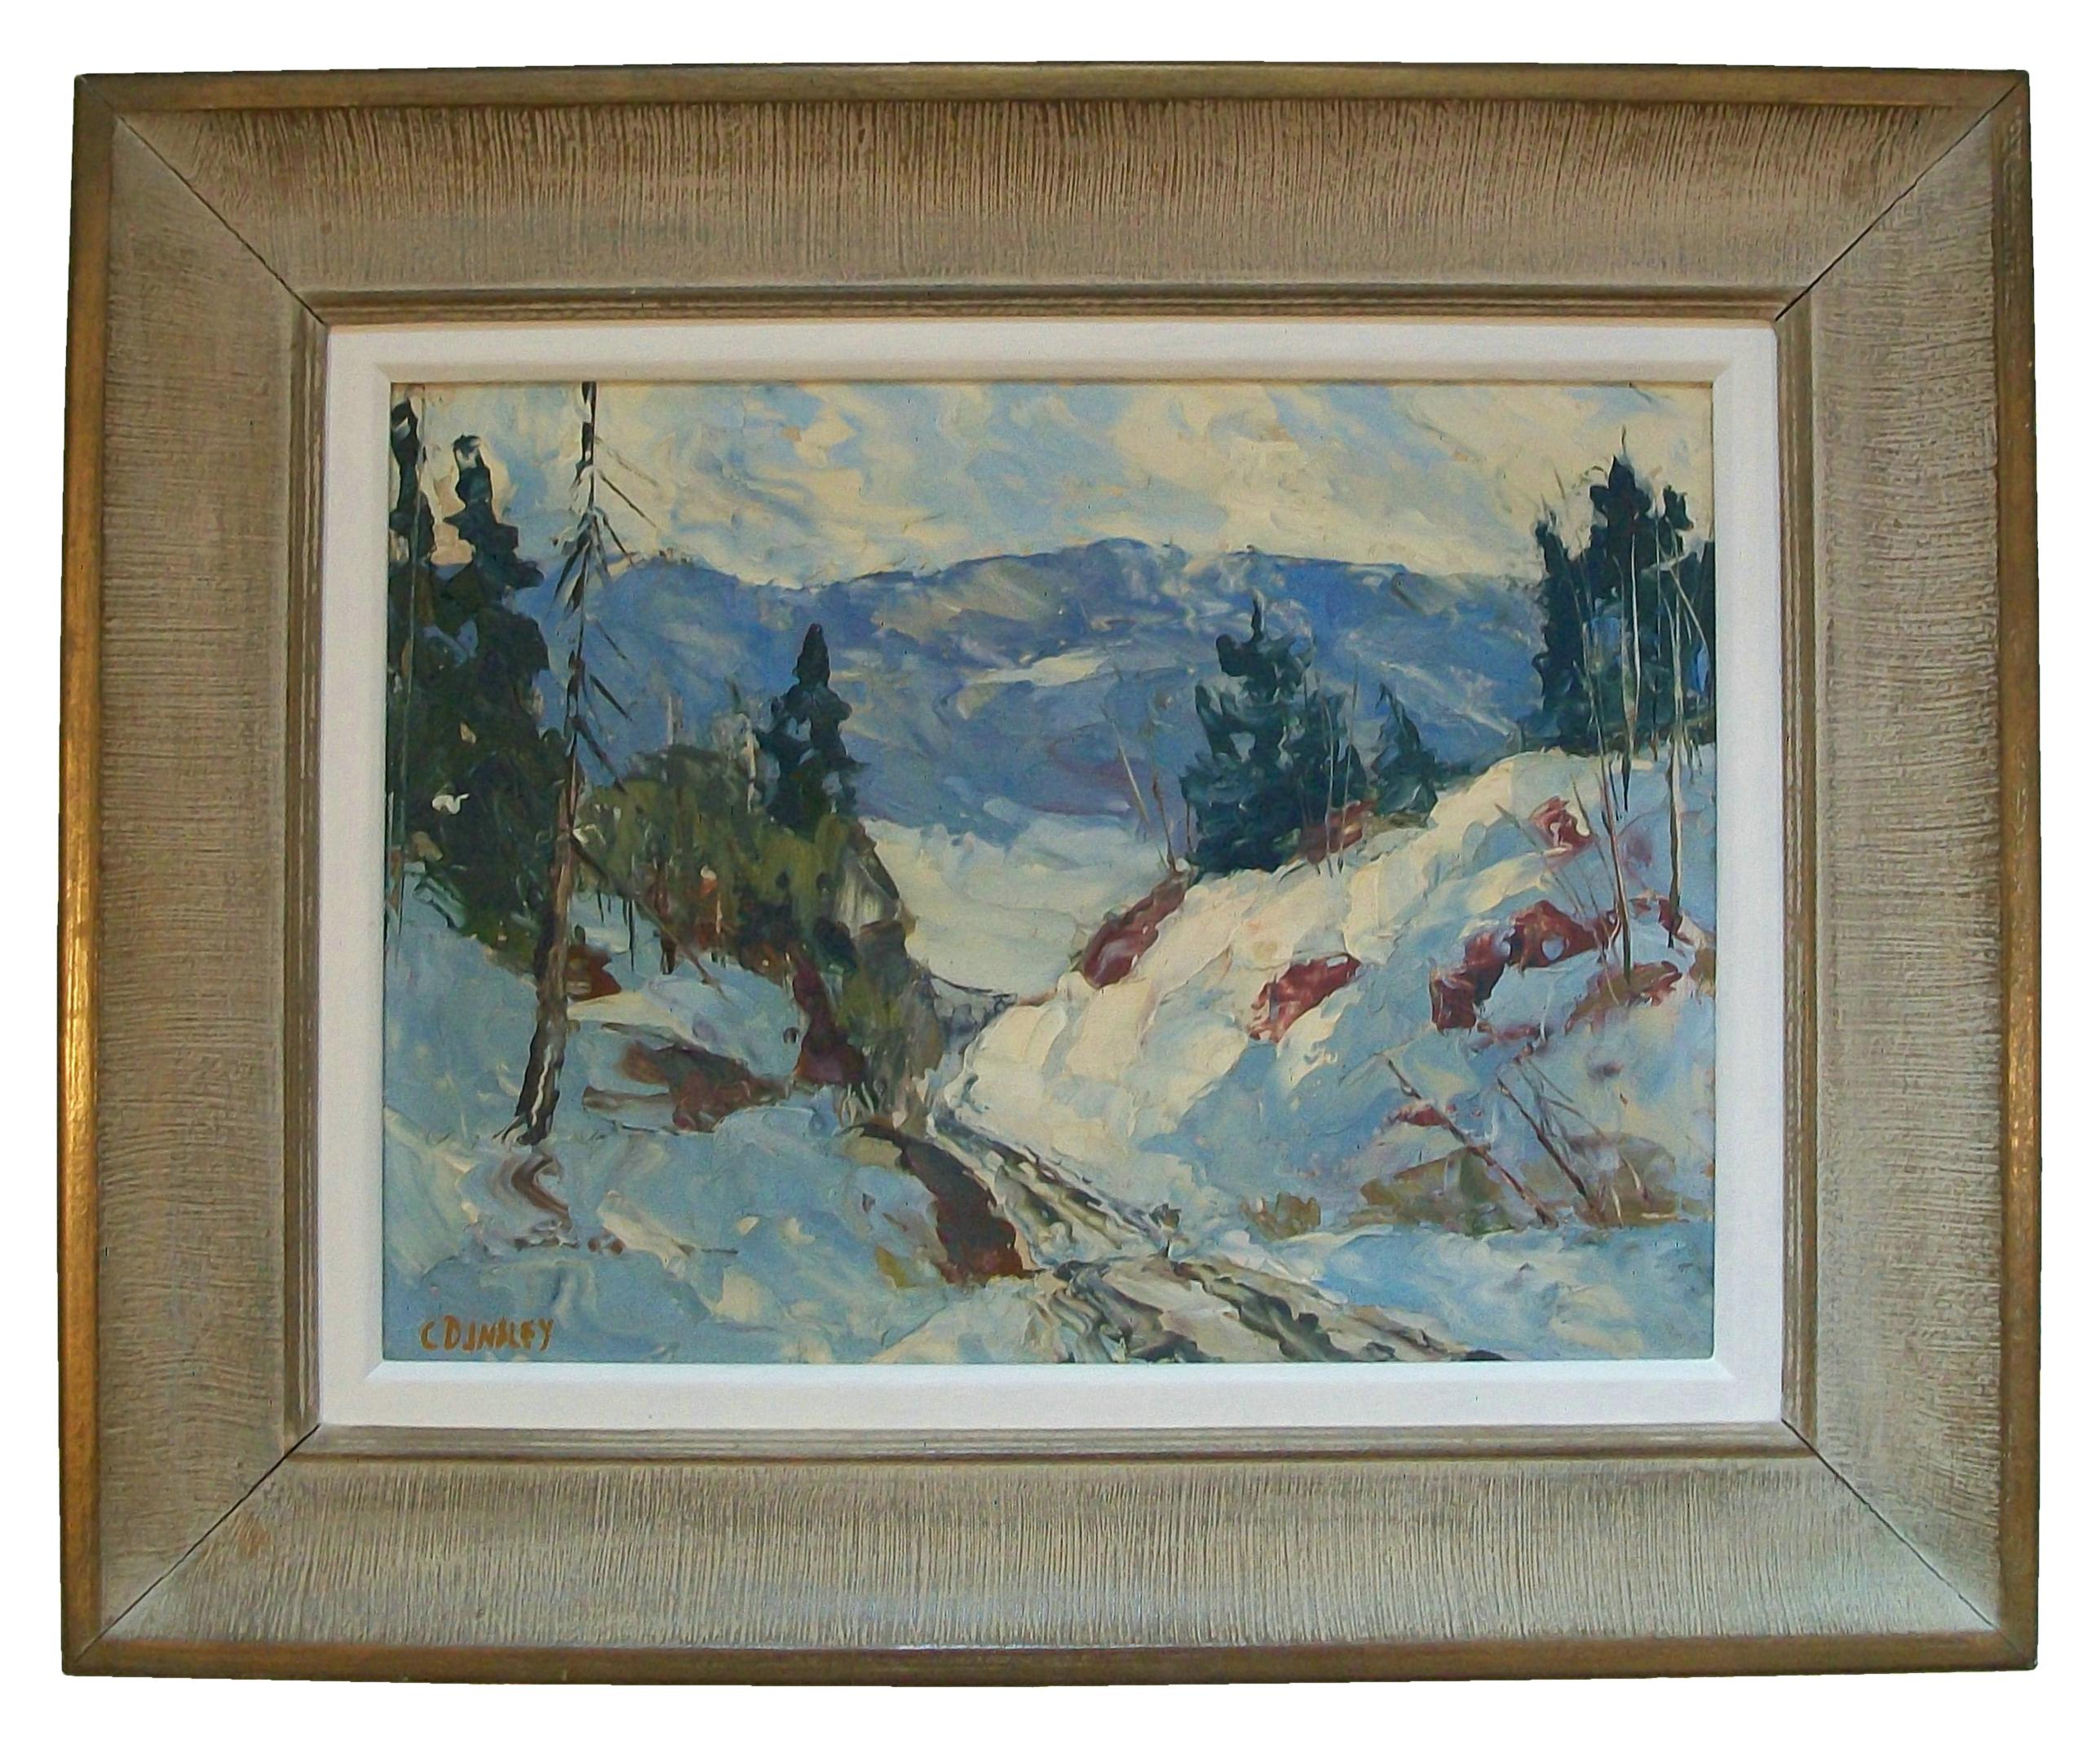 CLAYTON DAVID INSLEY (Canadian 1908-1987) - 'Late Afternoon Snow in the Muskoka District' - Post Impressionist winter landscape oil painting on prepared hardboard - the painting featuring a heavy impasto technique creating an almost three